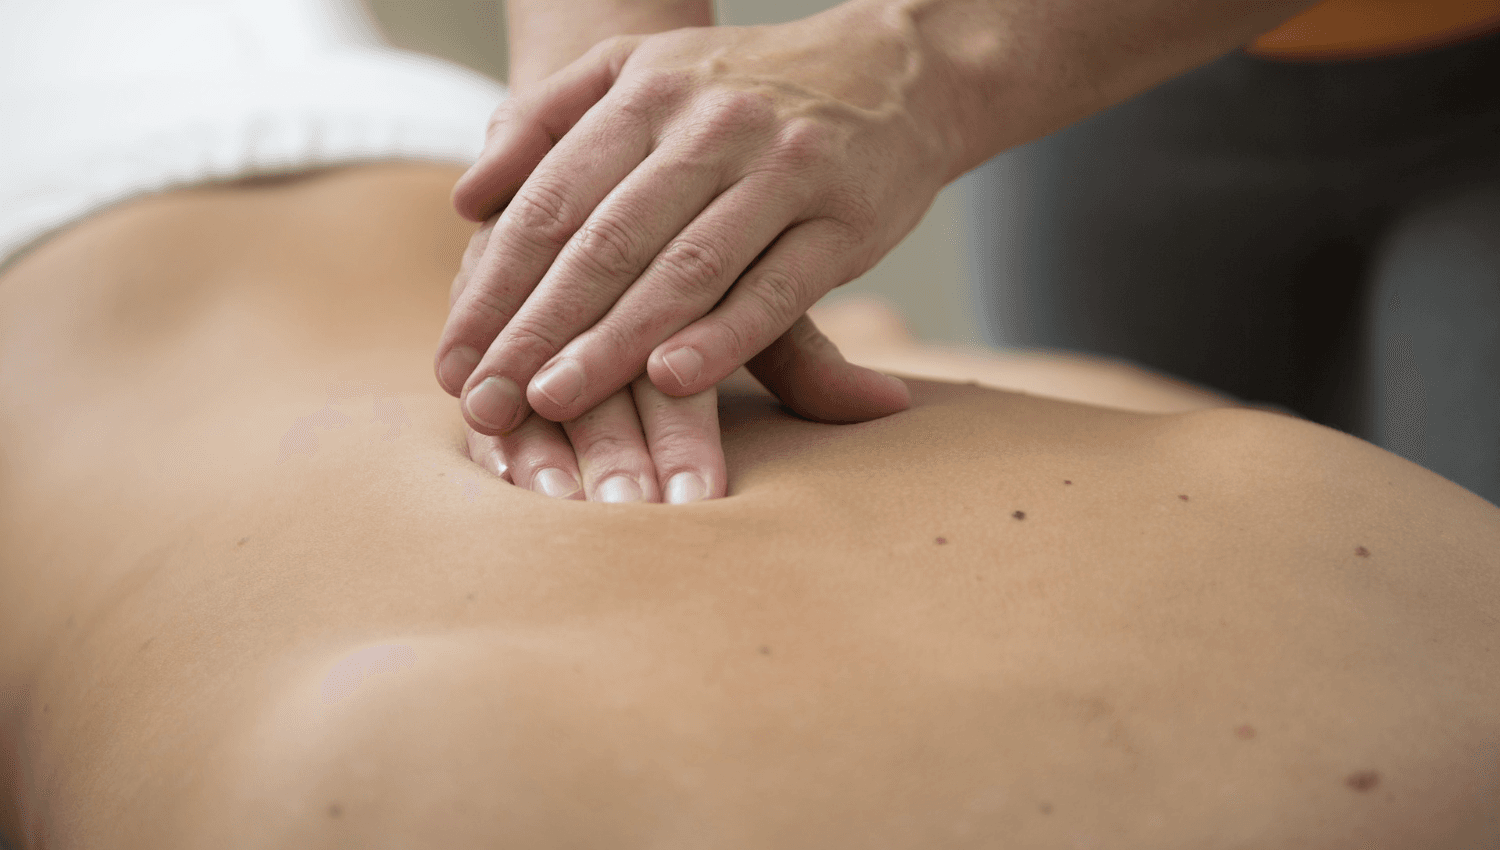 Image for Massage Therapy